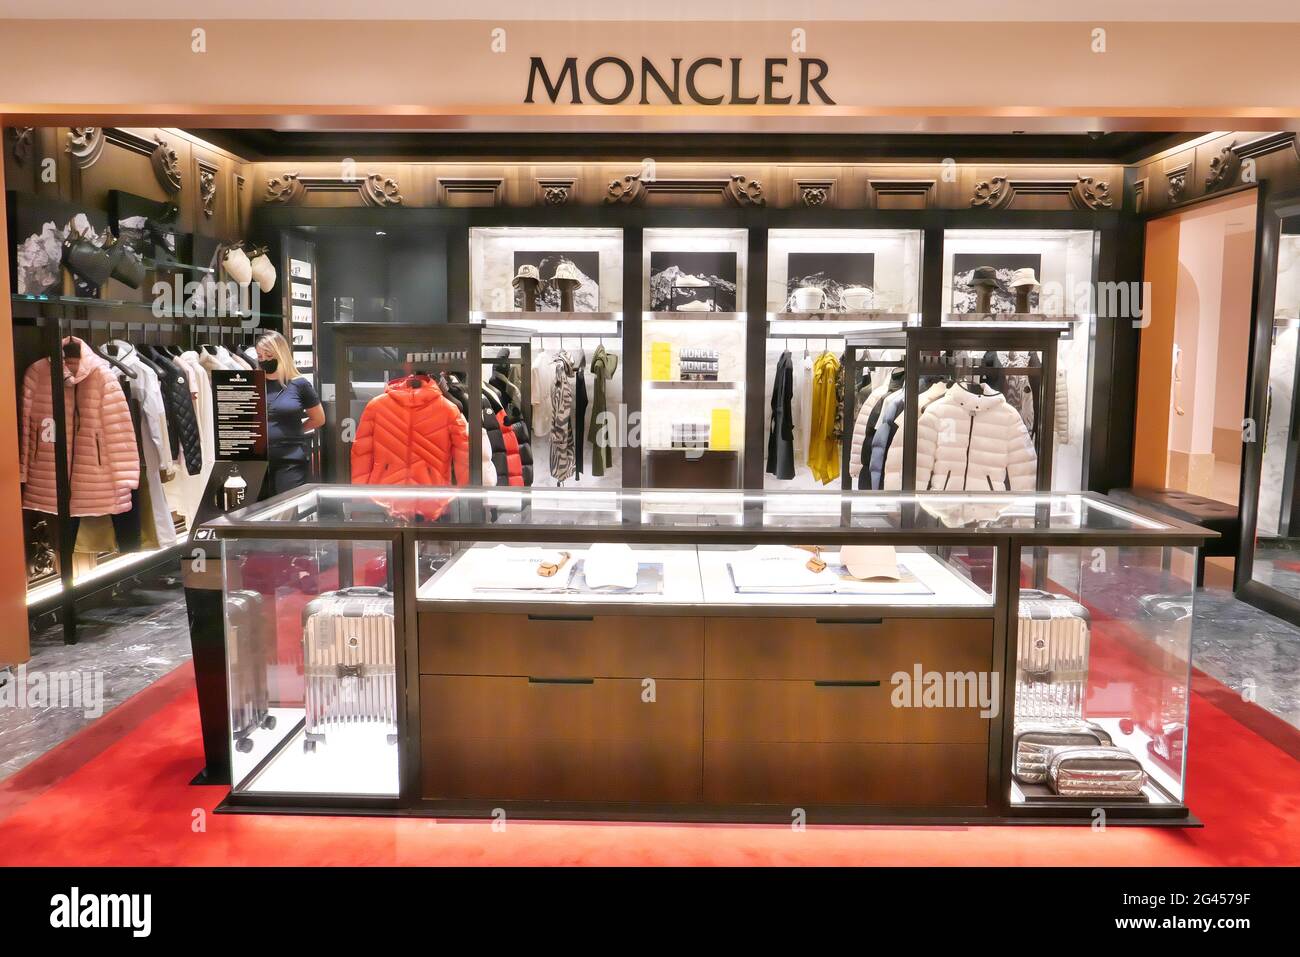 JACKETS ON DISPLAY AT MONCLER BOUTIQUE INSIDE THE RINASCENTE FASHION STORE  Stock Photo - Alamy